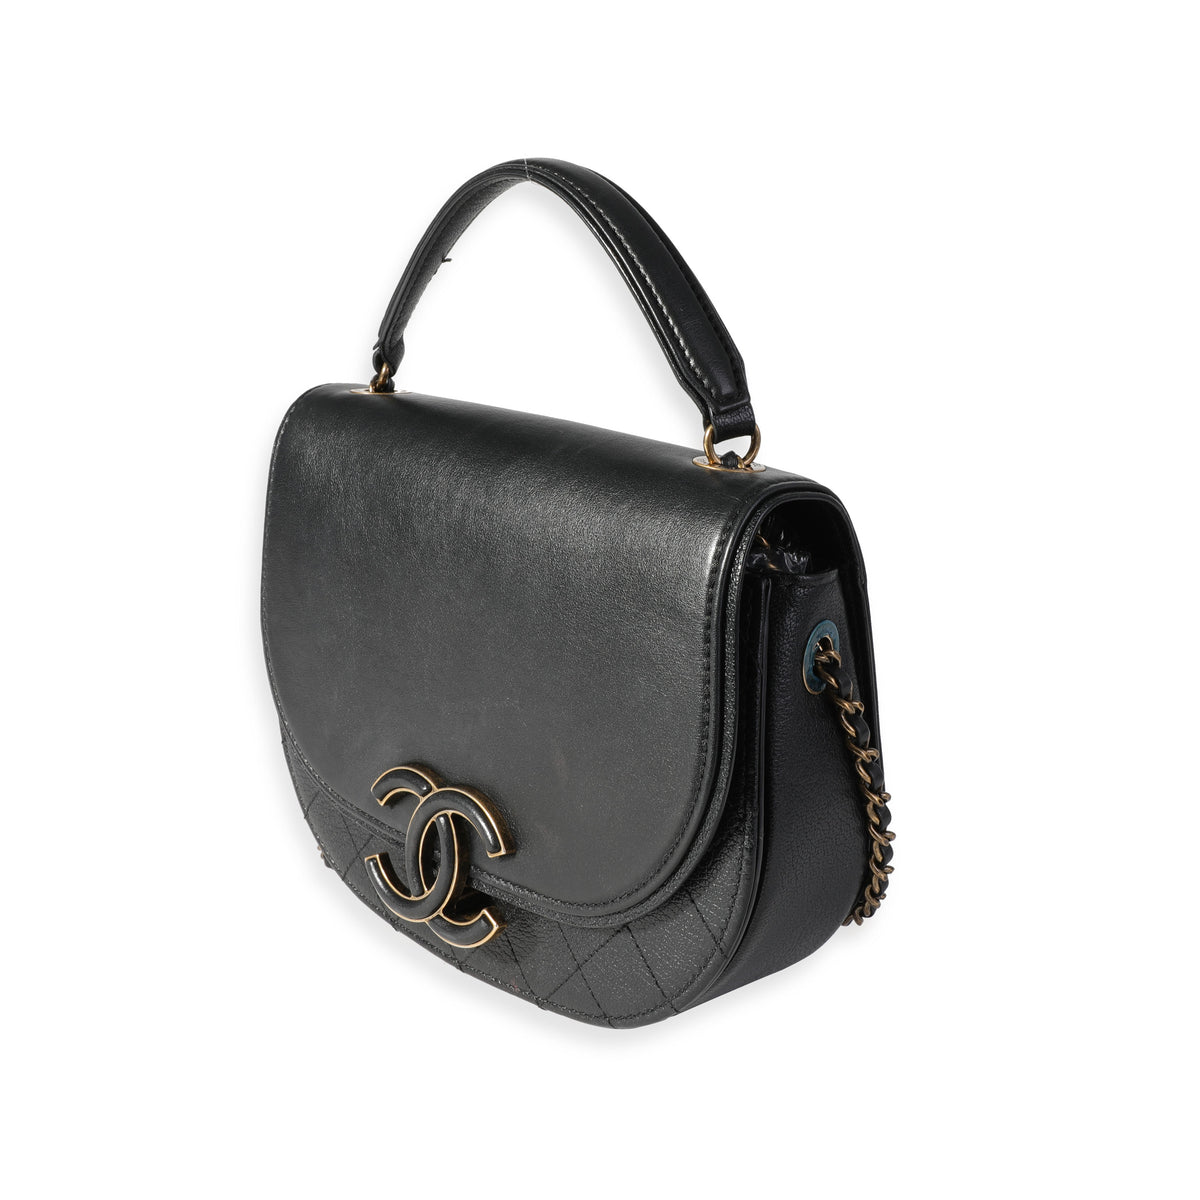 Chanel Black Quilted Calfskin Coco Curve Flap Bag, myGemma